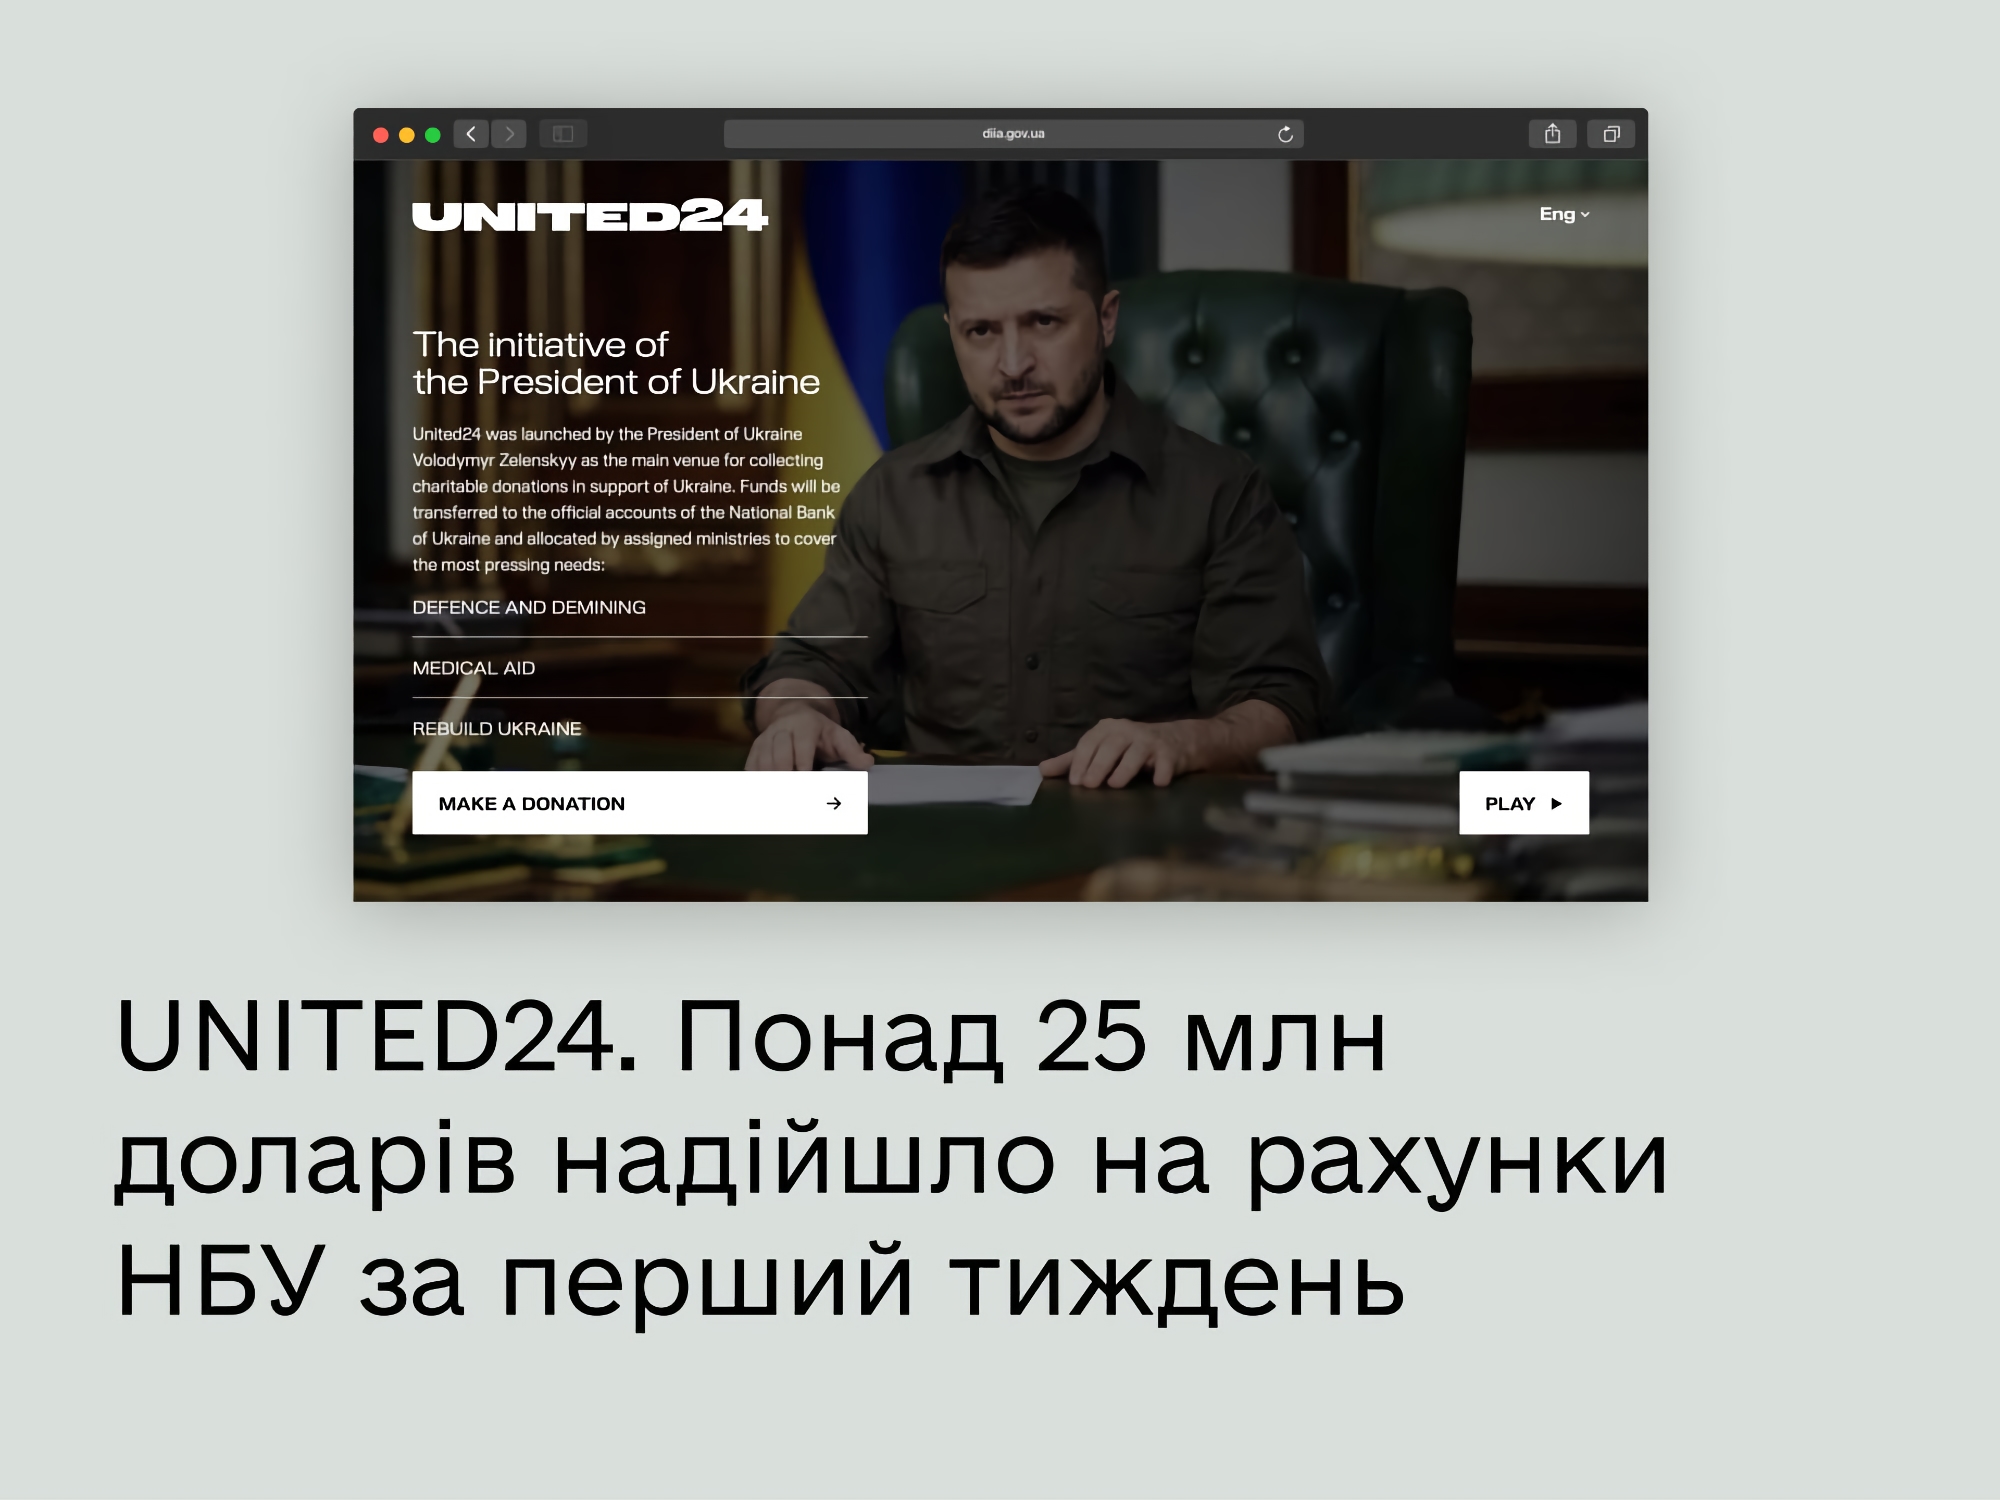 More than $25,000,000: this amount was donated to Ukraine in the first week of the UNITED24 charity platform